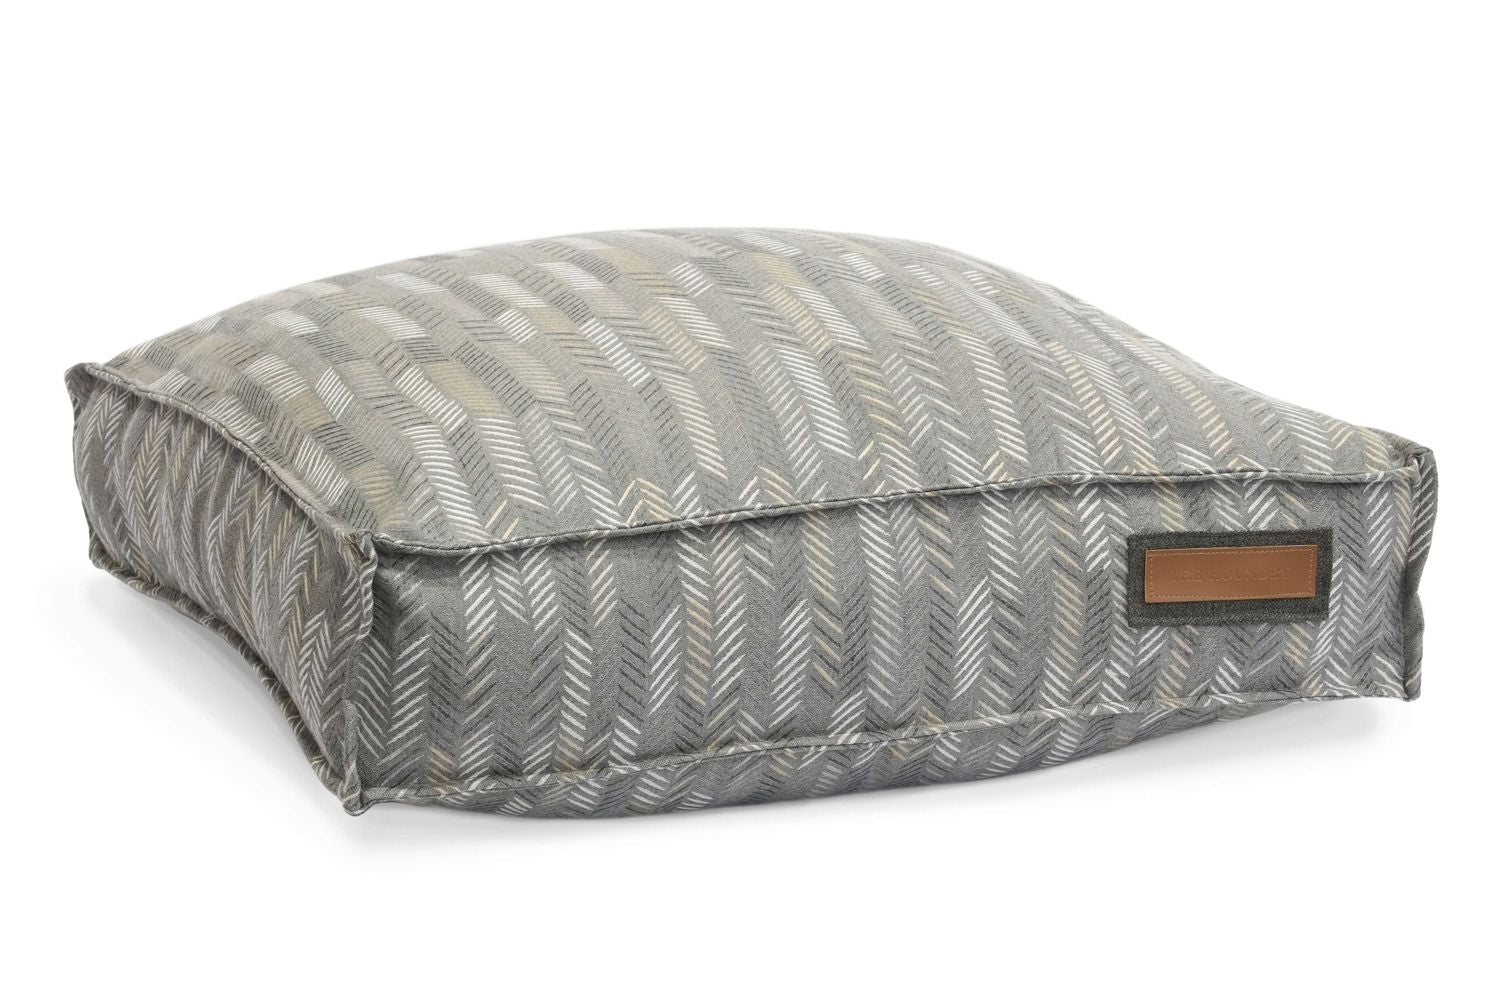 Lounger Pet Bed in Muttly Merle